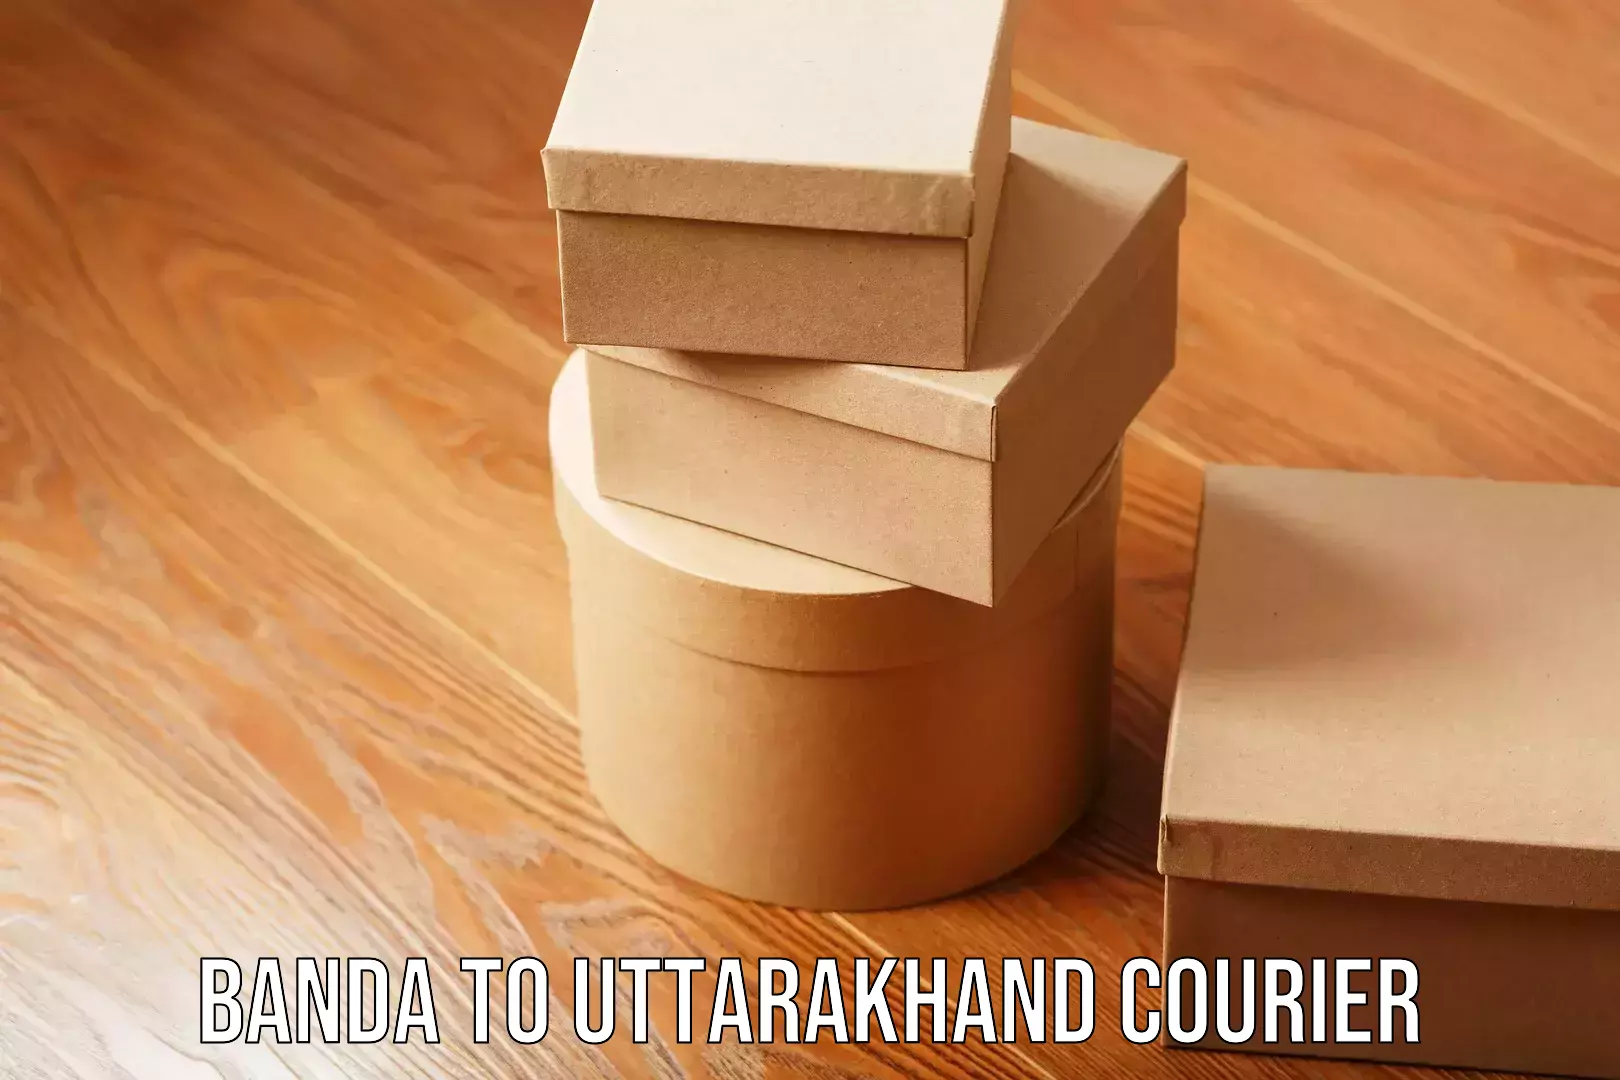 End-to-end delivery Banda to Uttarakhand